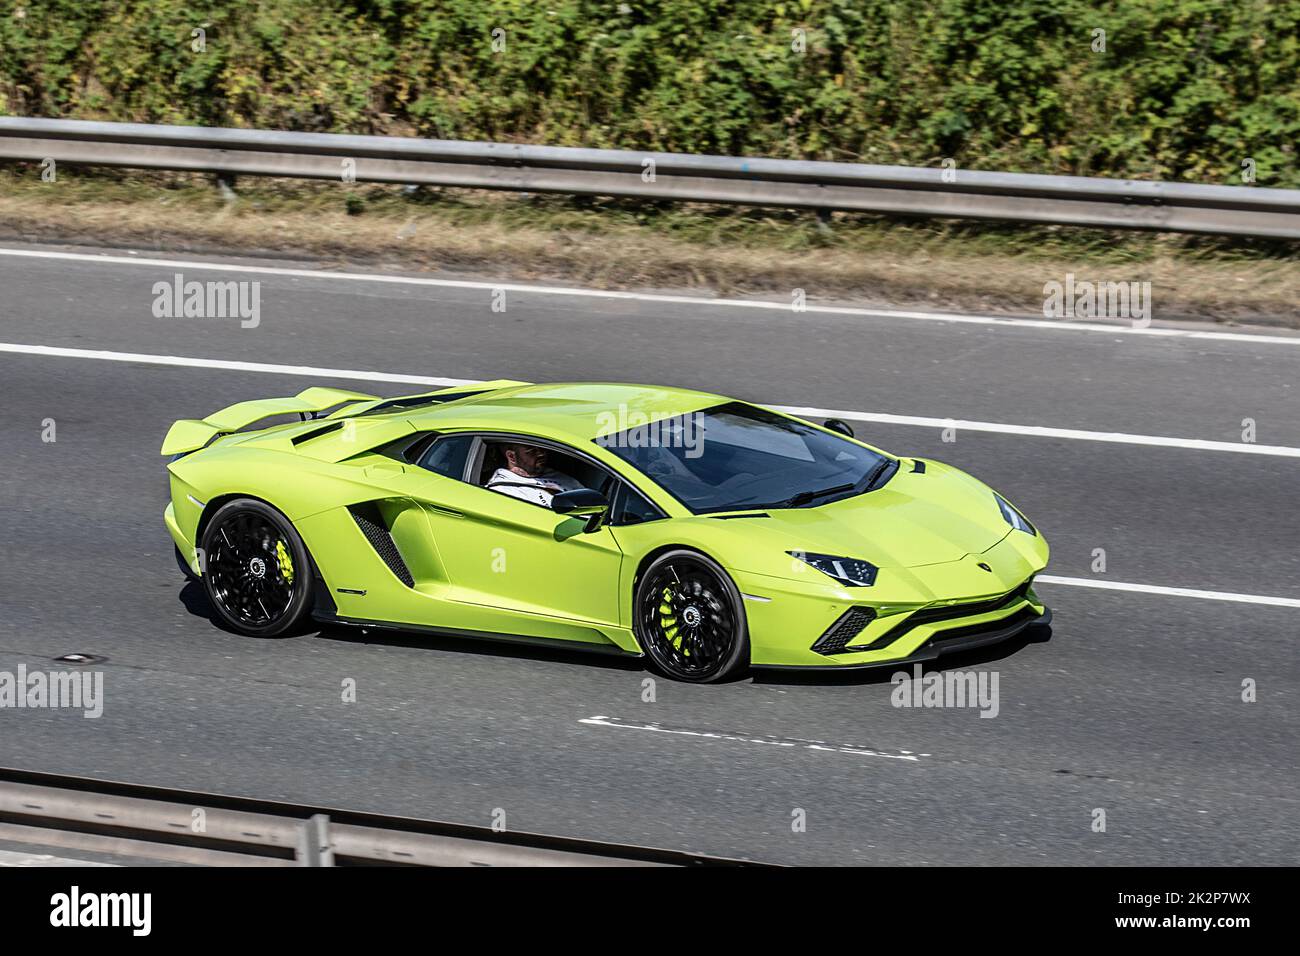 2022 Yellow Lamborghini Aventador Ultimae V12 coupe 12-cylinder mid-engined Italian supercar sports car; Vehicular traffic moving vehicles, 6.5-litre cars driving on UK roads, motors, roadster motoring UK highway network. Stock Photo